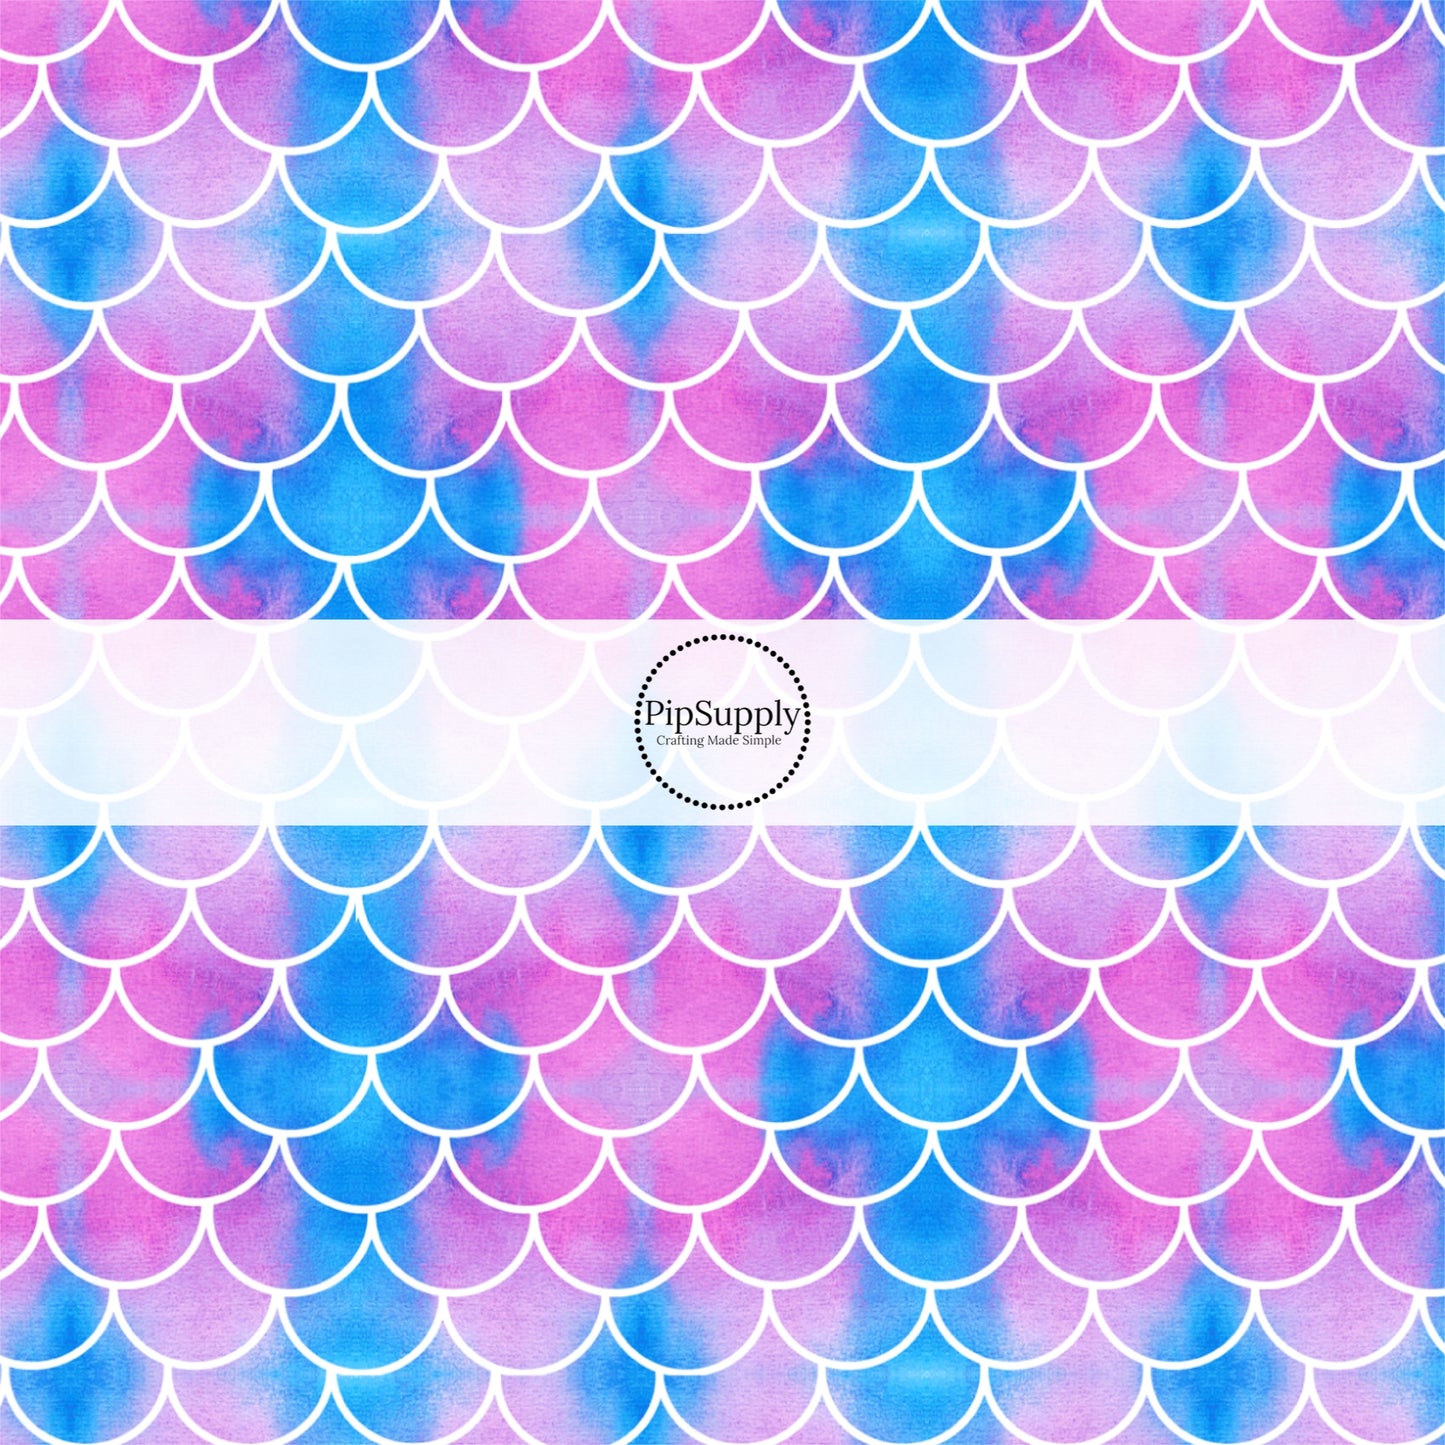 Watercolor ombre pink and blue mermaid scales fabric by the yard.